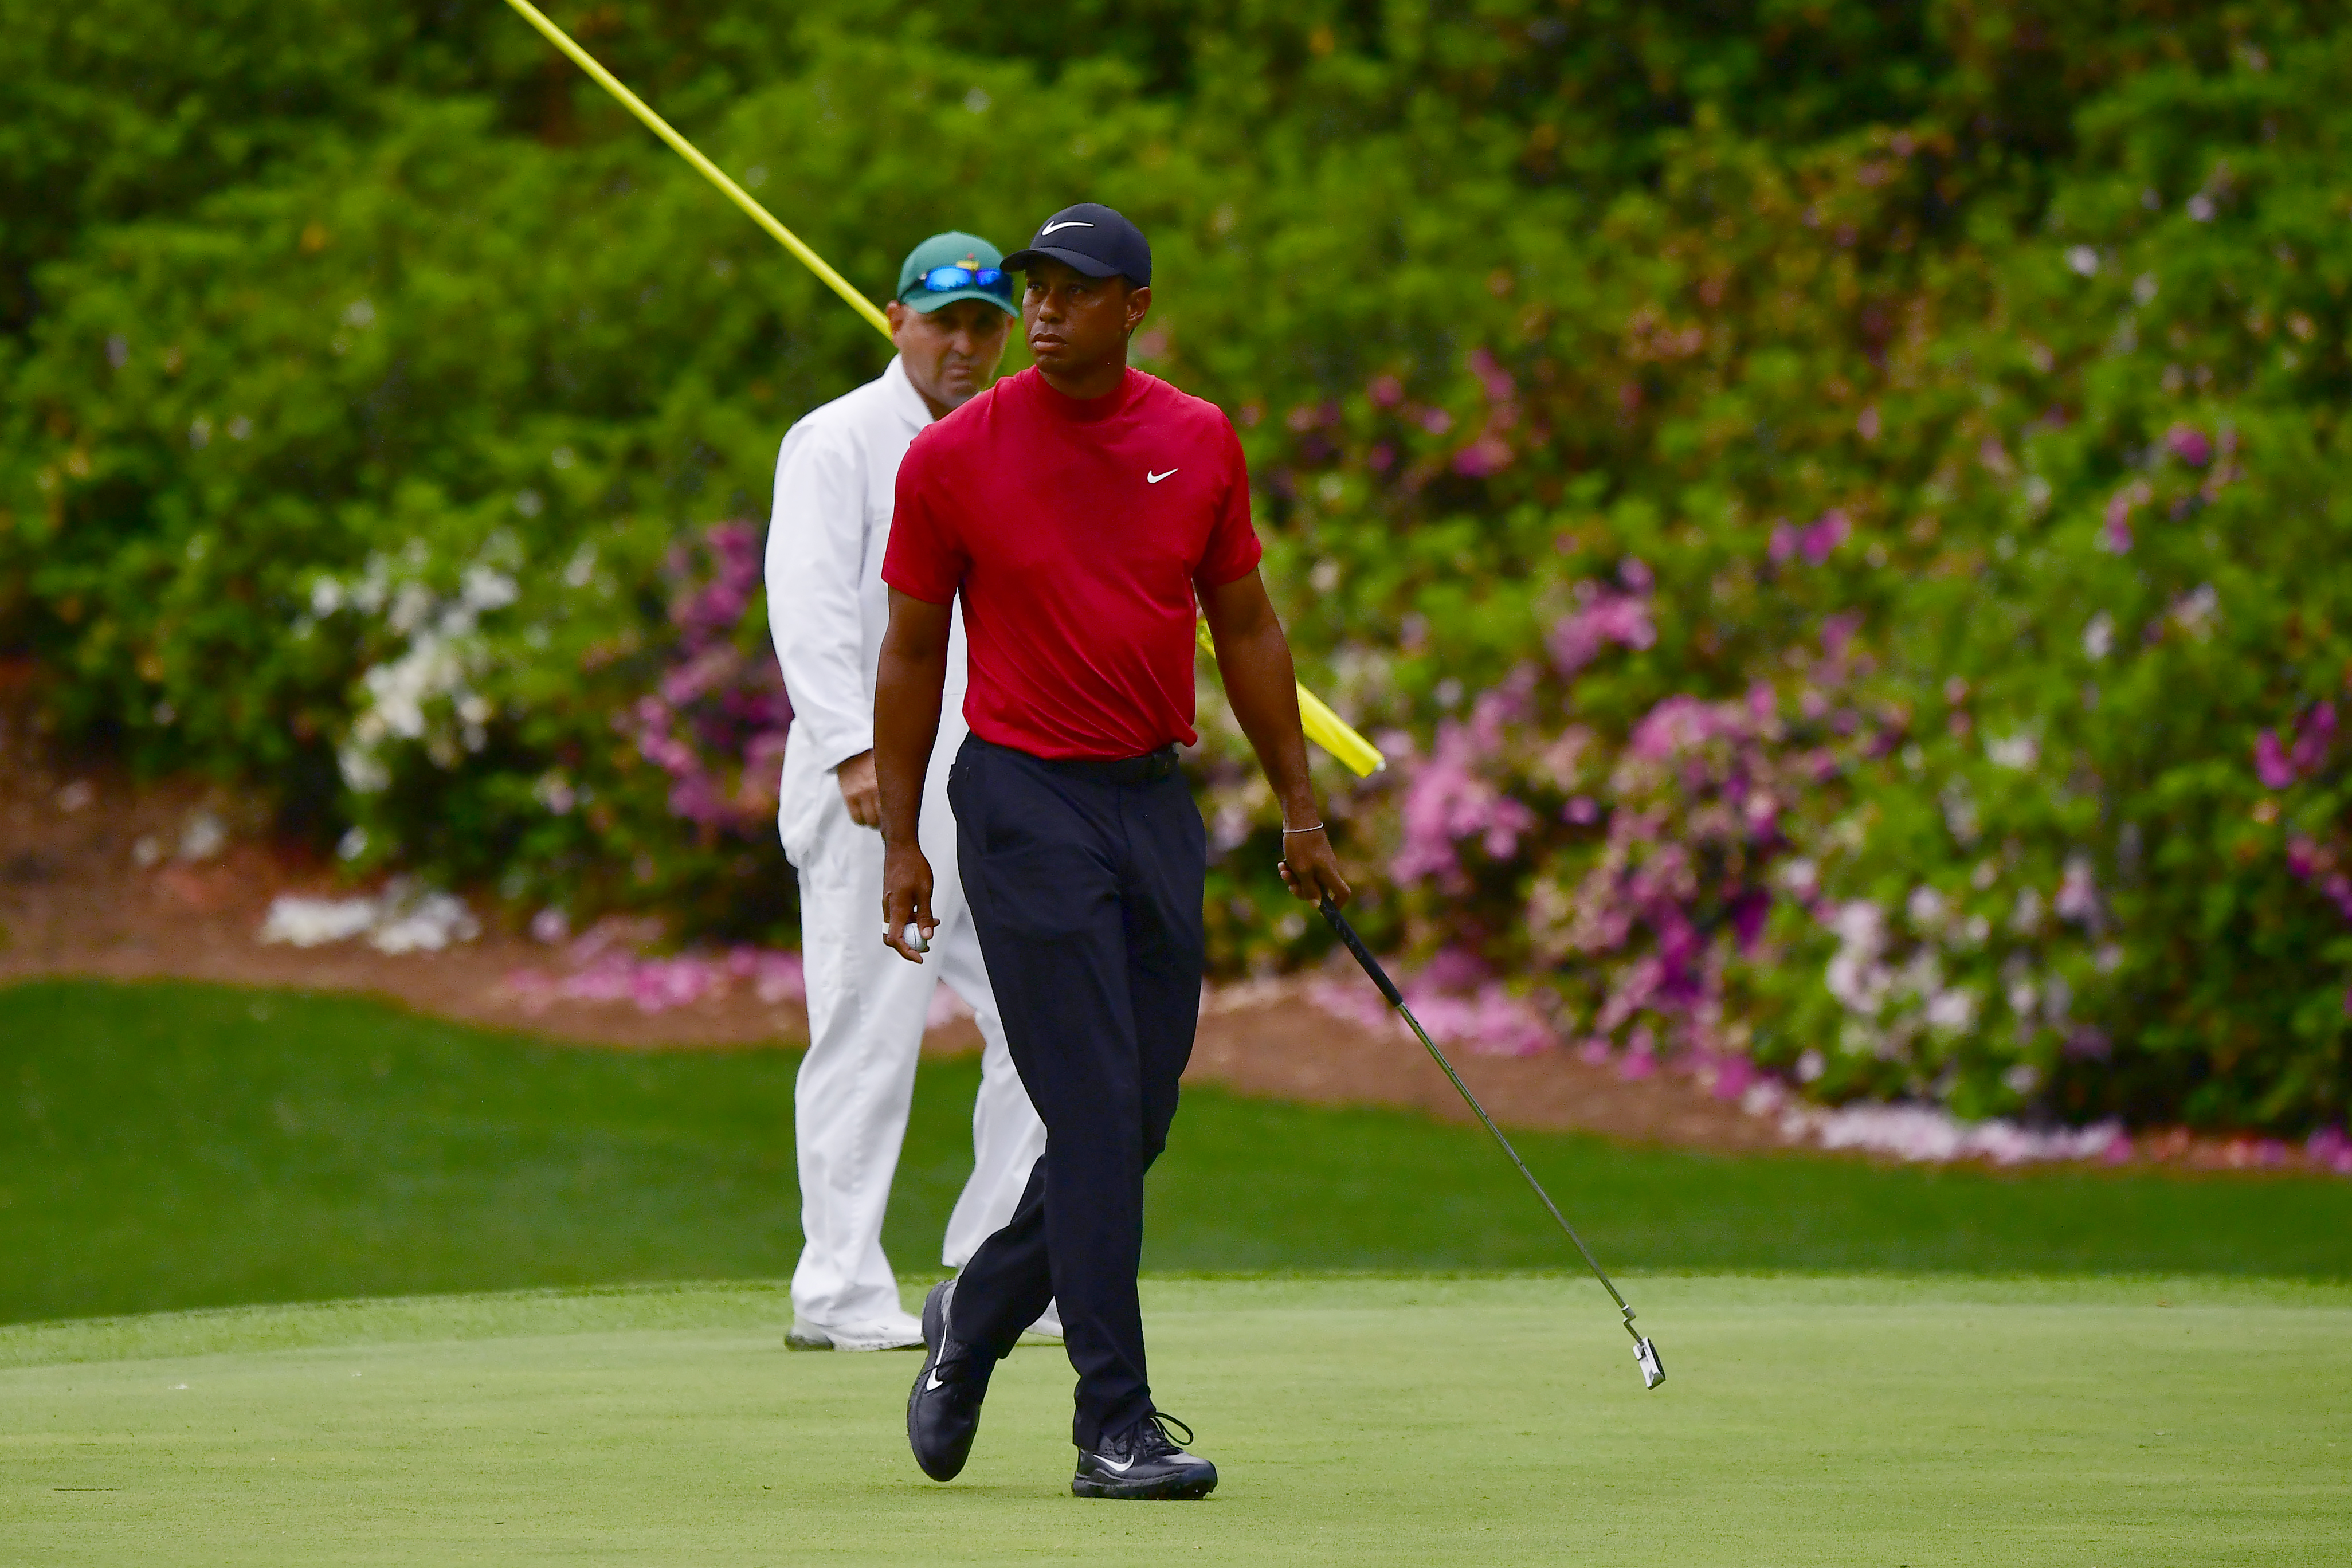 Highlight: Final Call as Tiger Woods wins the 2019 Masters